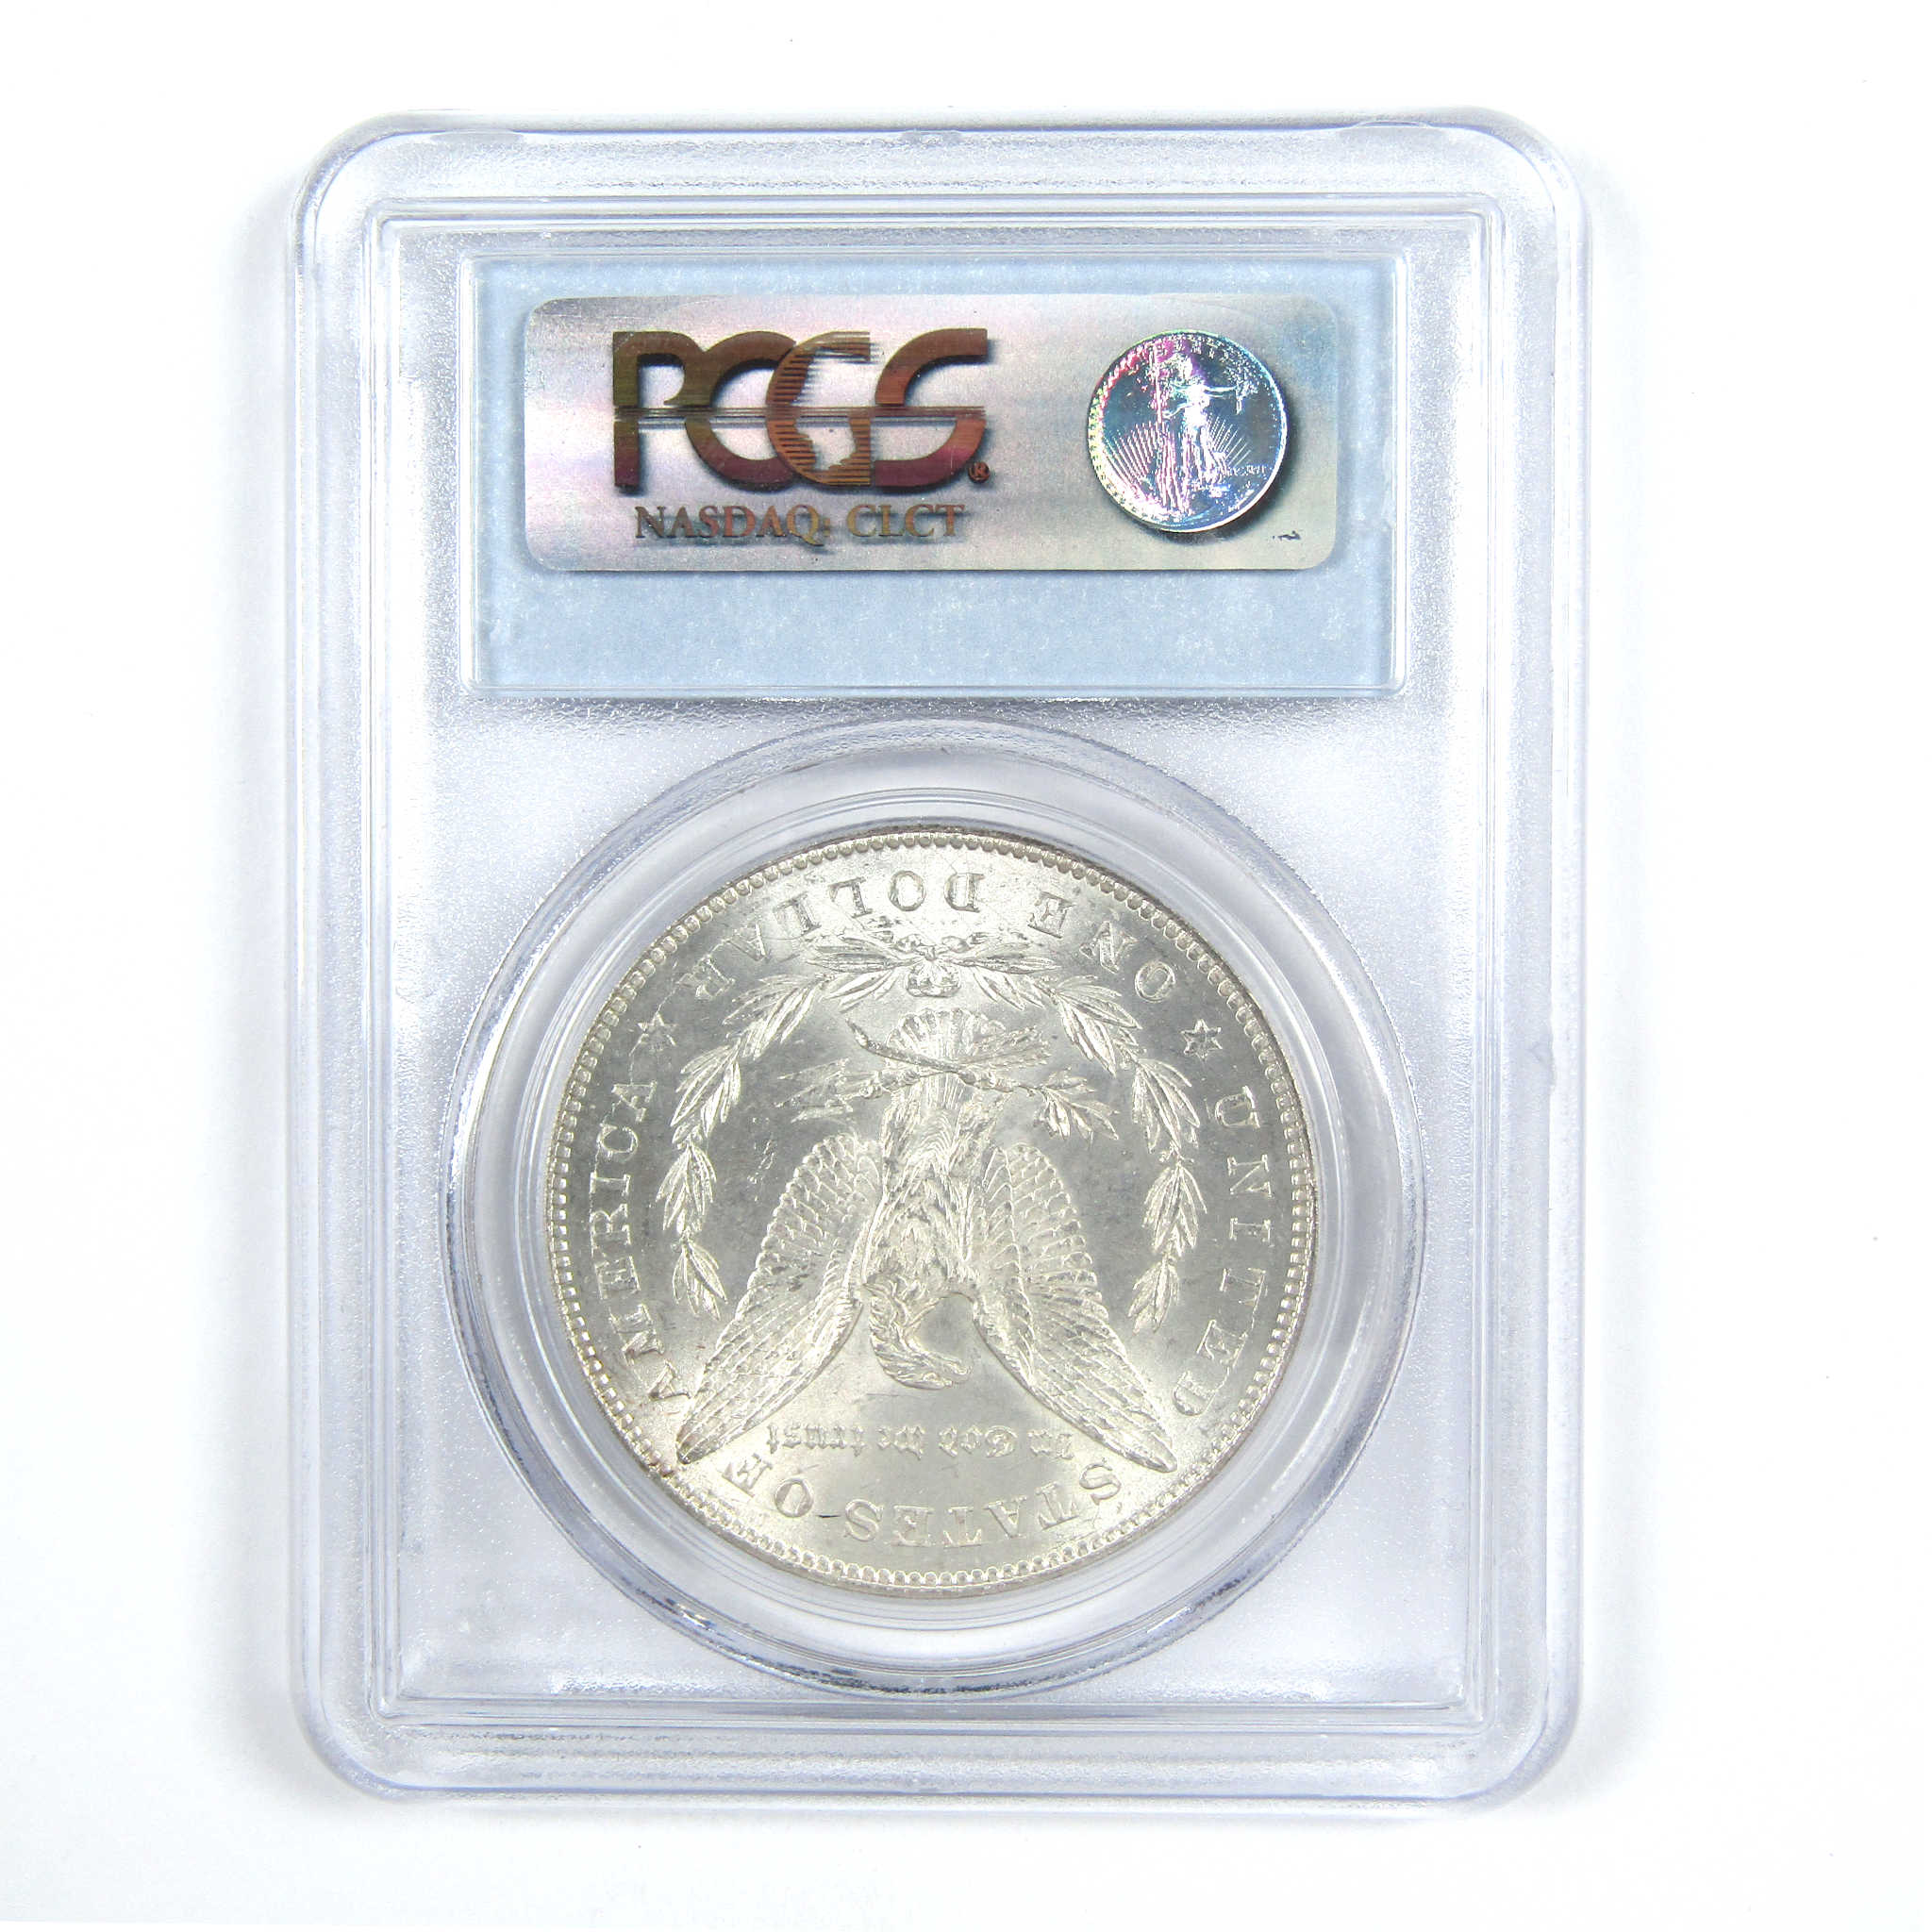 1878 7TF Rev 78 VAM-84 Morgan Dollar MS 62 PCGS Silver $1 SKU:CPC7335 - Morgan coin - Morgan silver dollar - Morgan silver dollar for sale - Profile Coins &amp; Collectibles